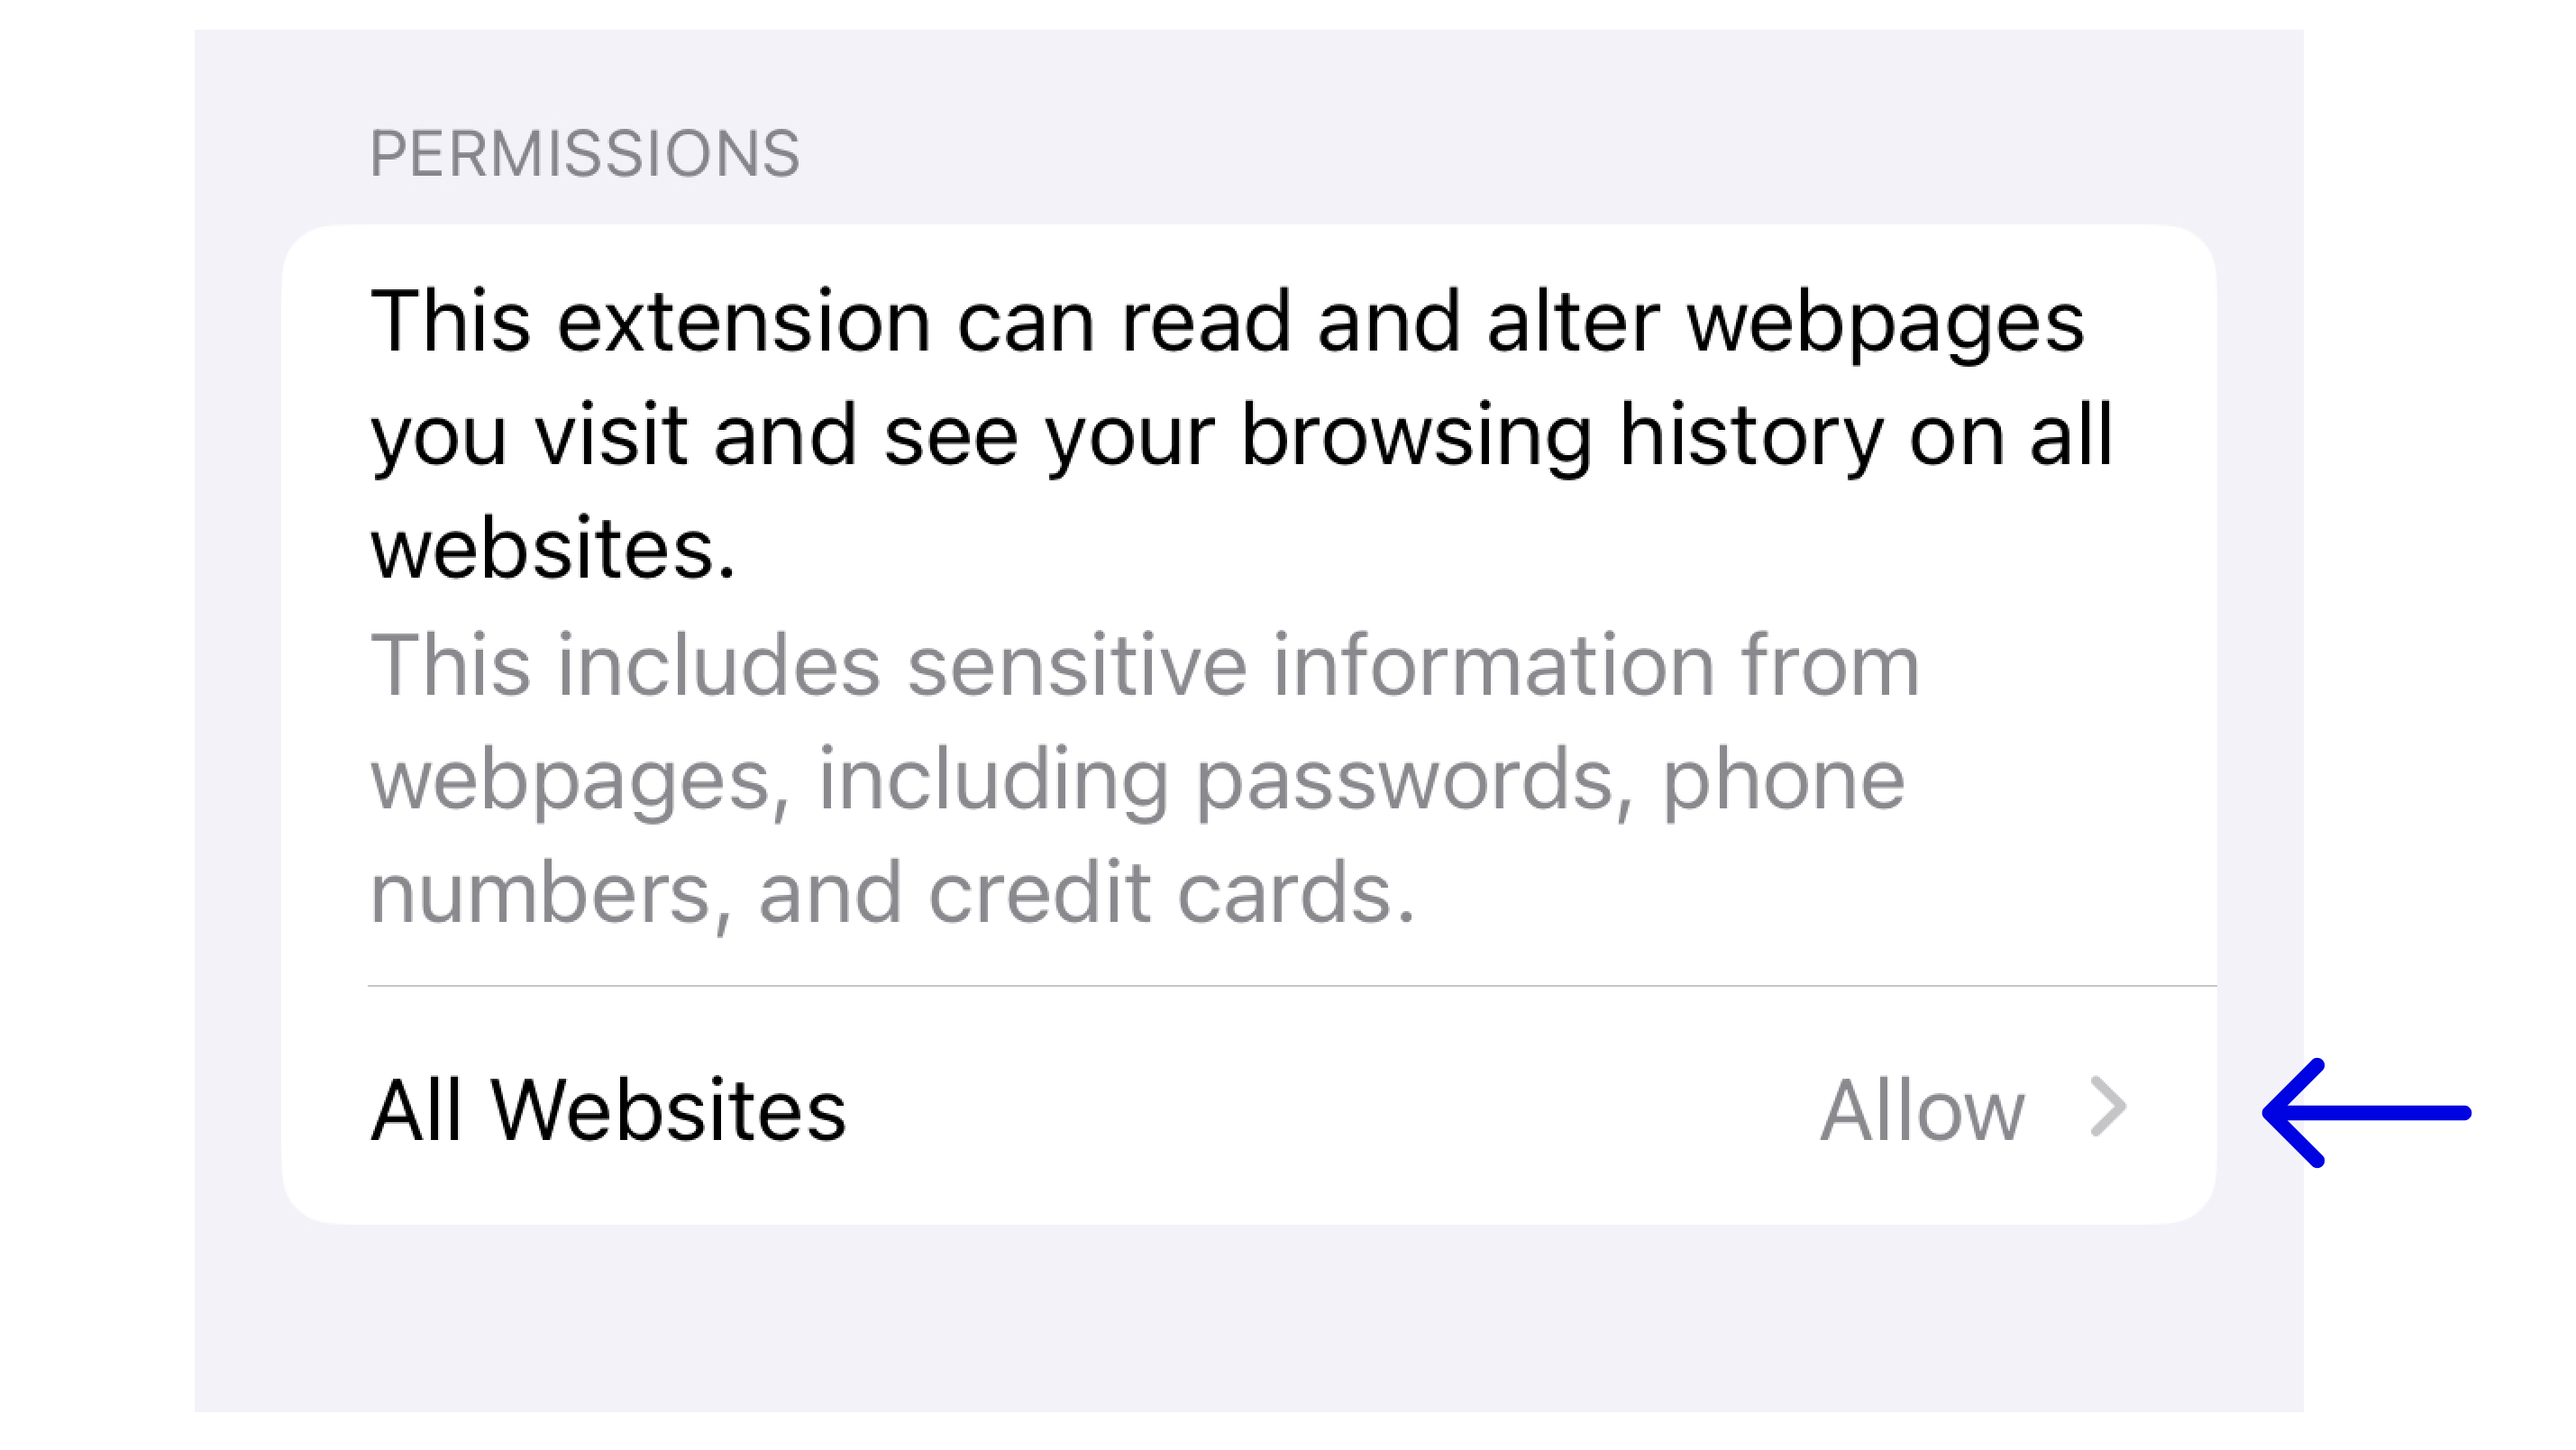 The permissions section indicating the option to allow on all websites.